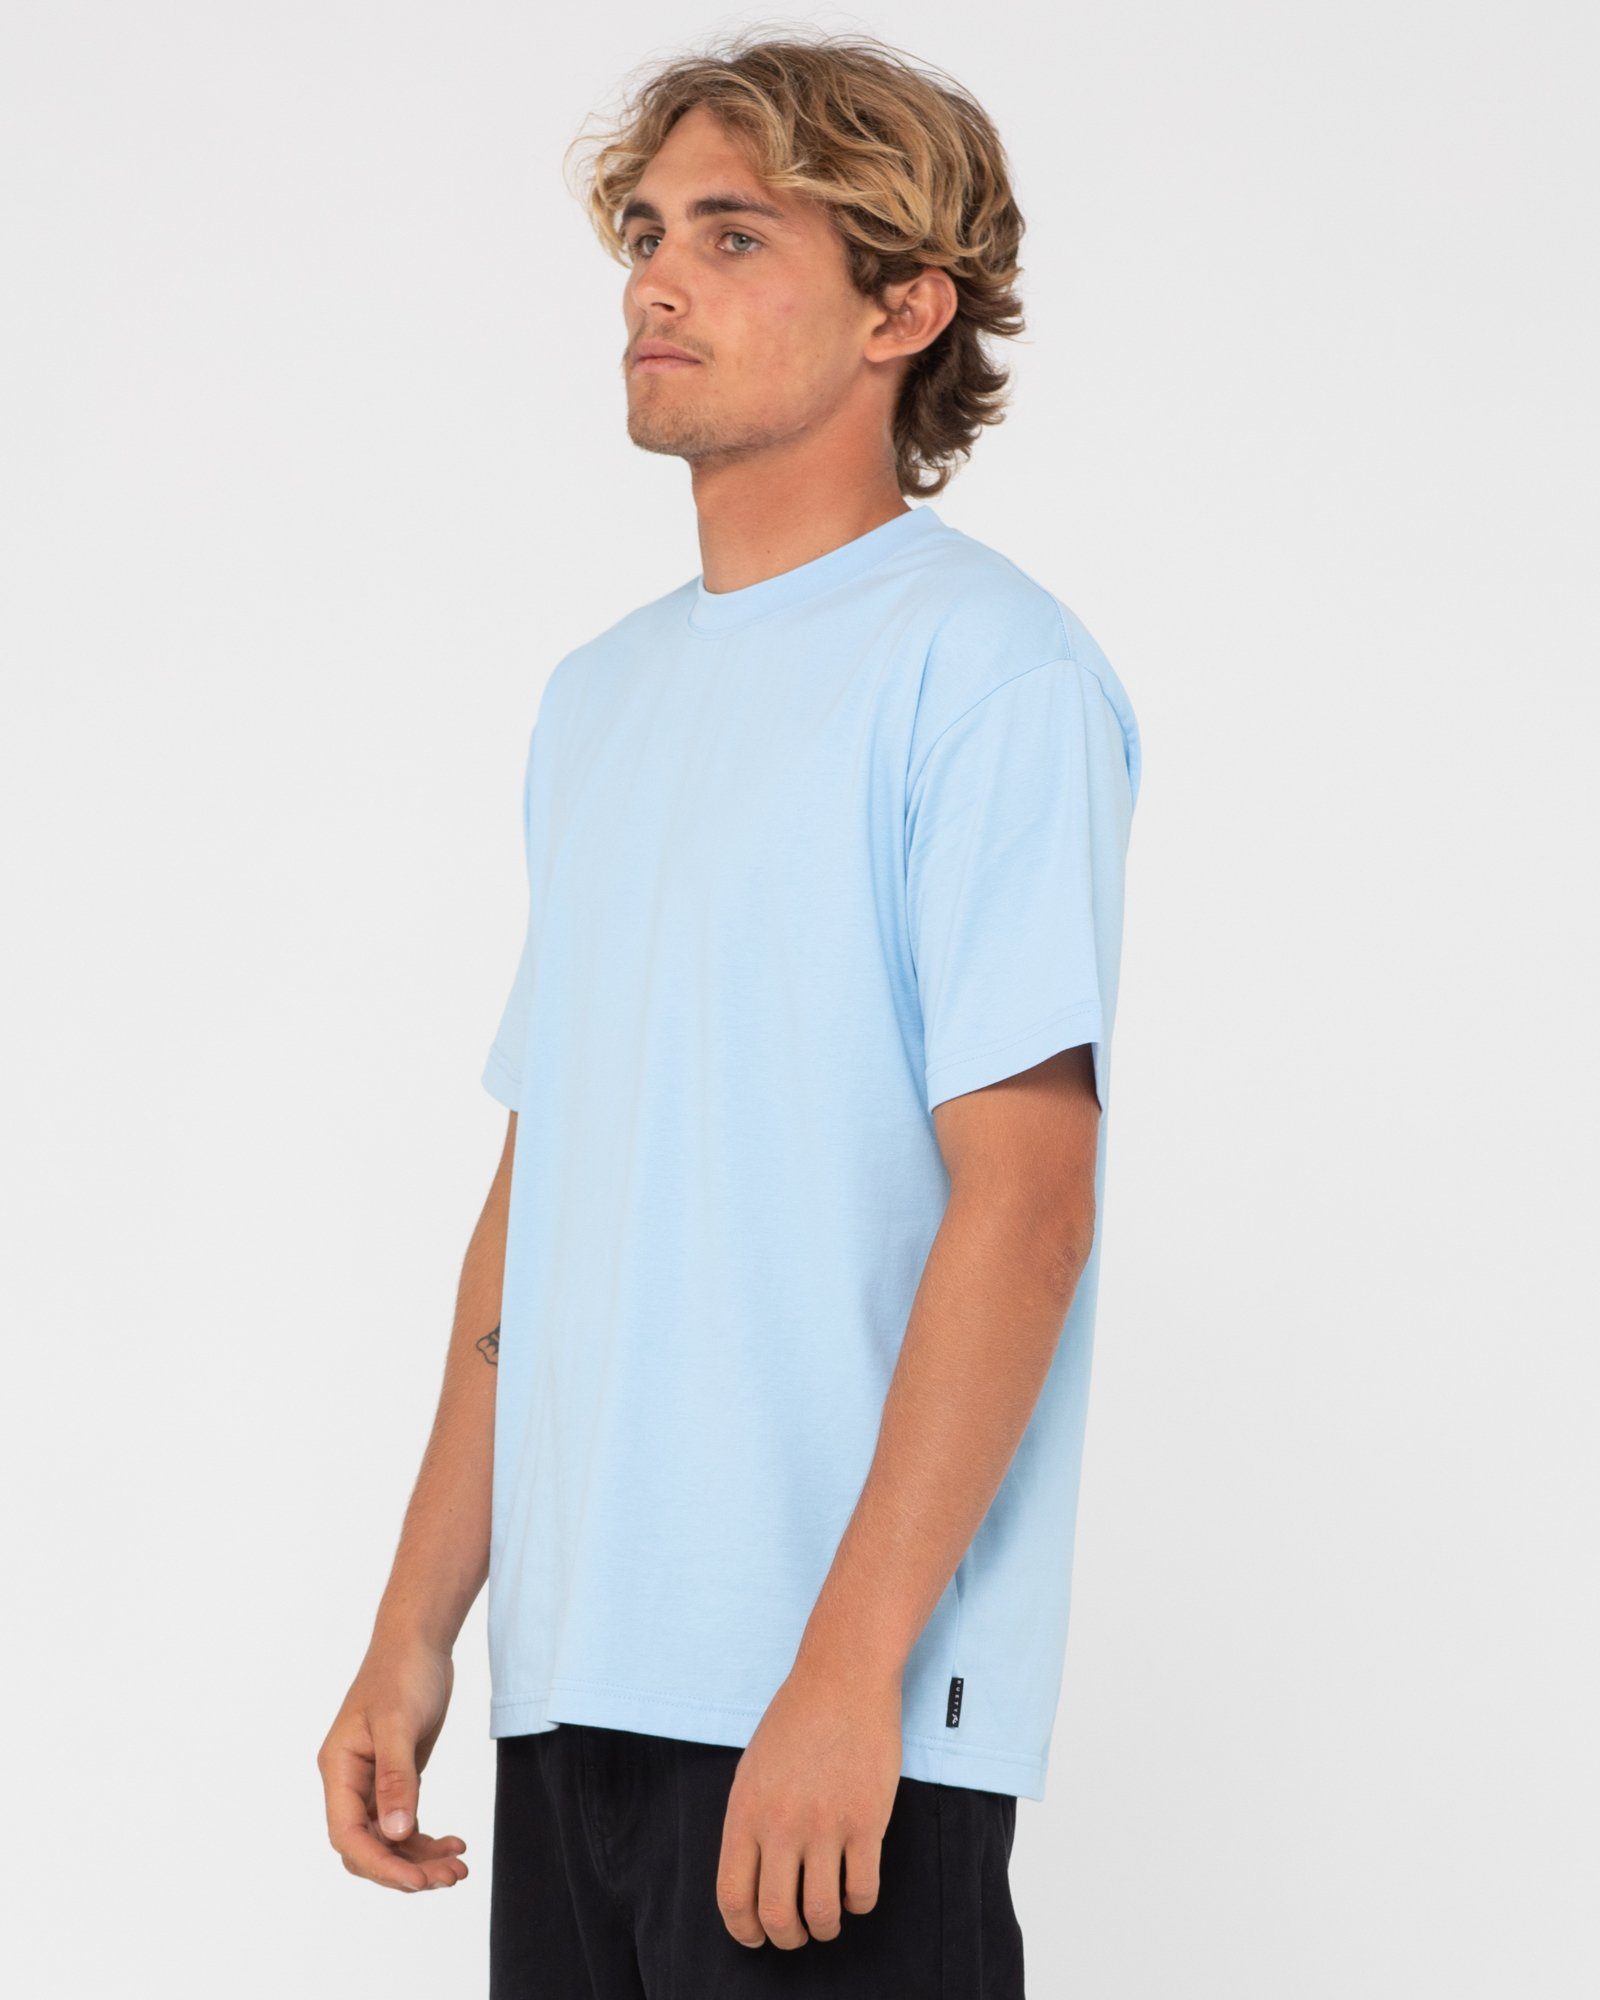 TEE BLUE T-Shirt PASTEL DELUXE Rusty S/S BLANK